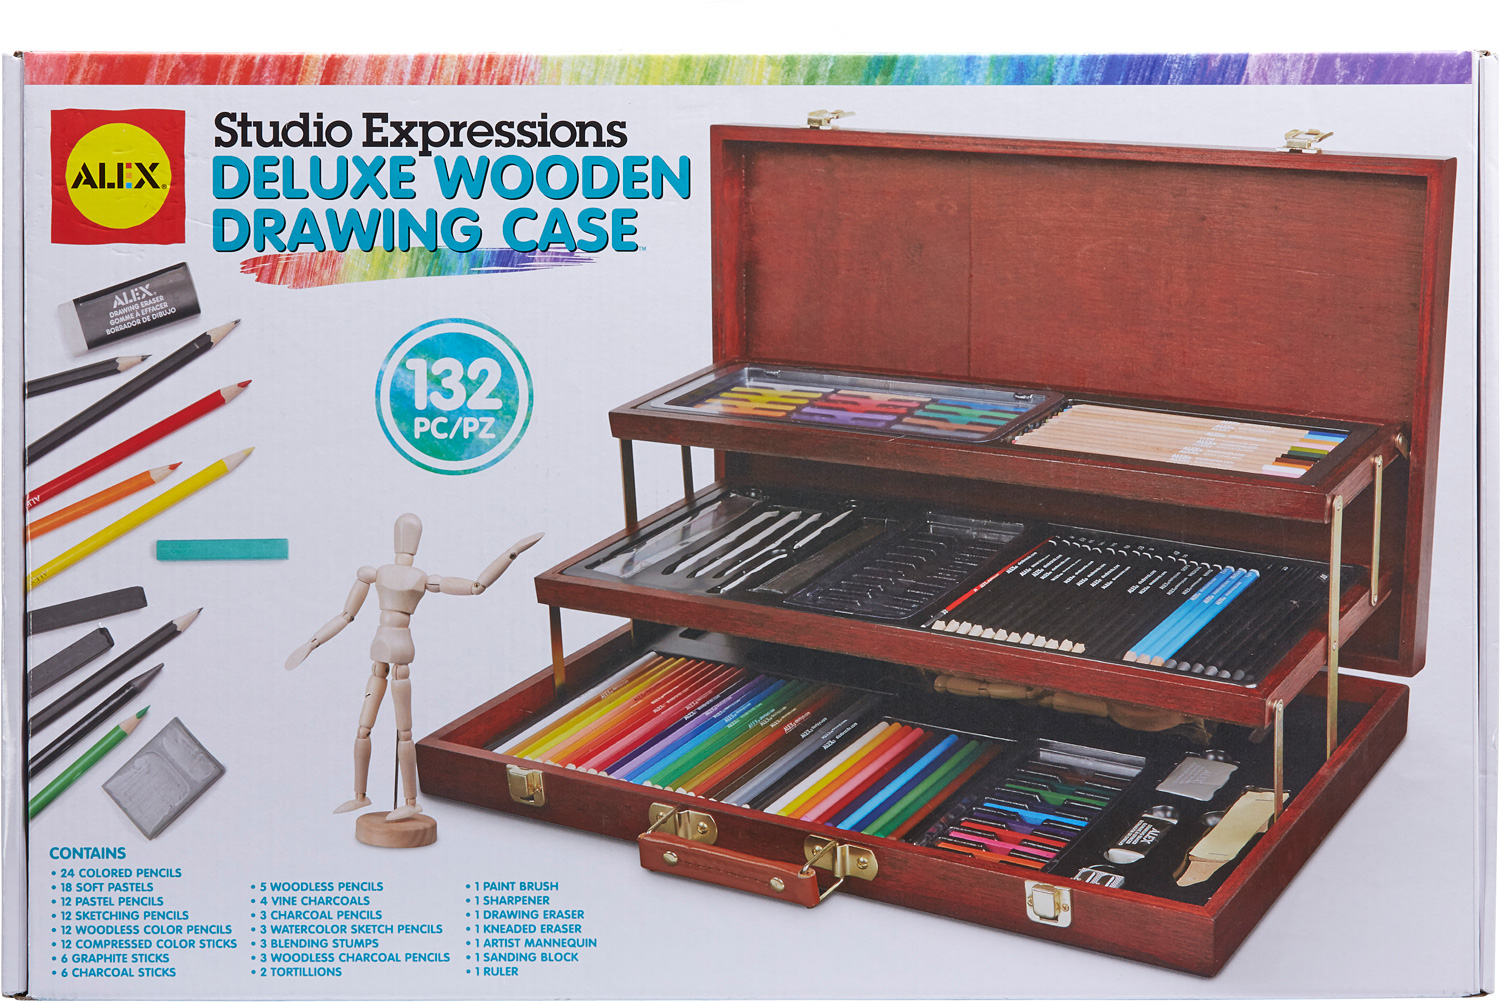 ALEX Art Studio Expressions Deluxe Wooden Drawing Case Kremer's Toy